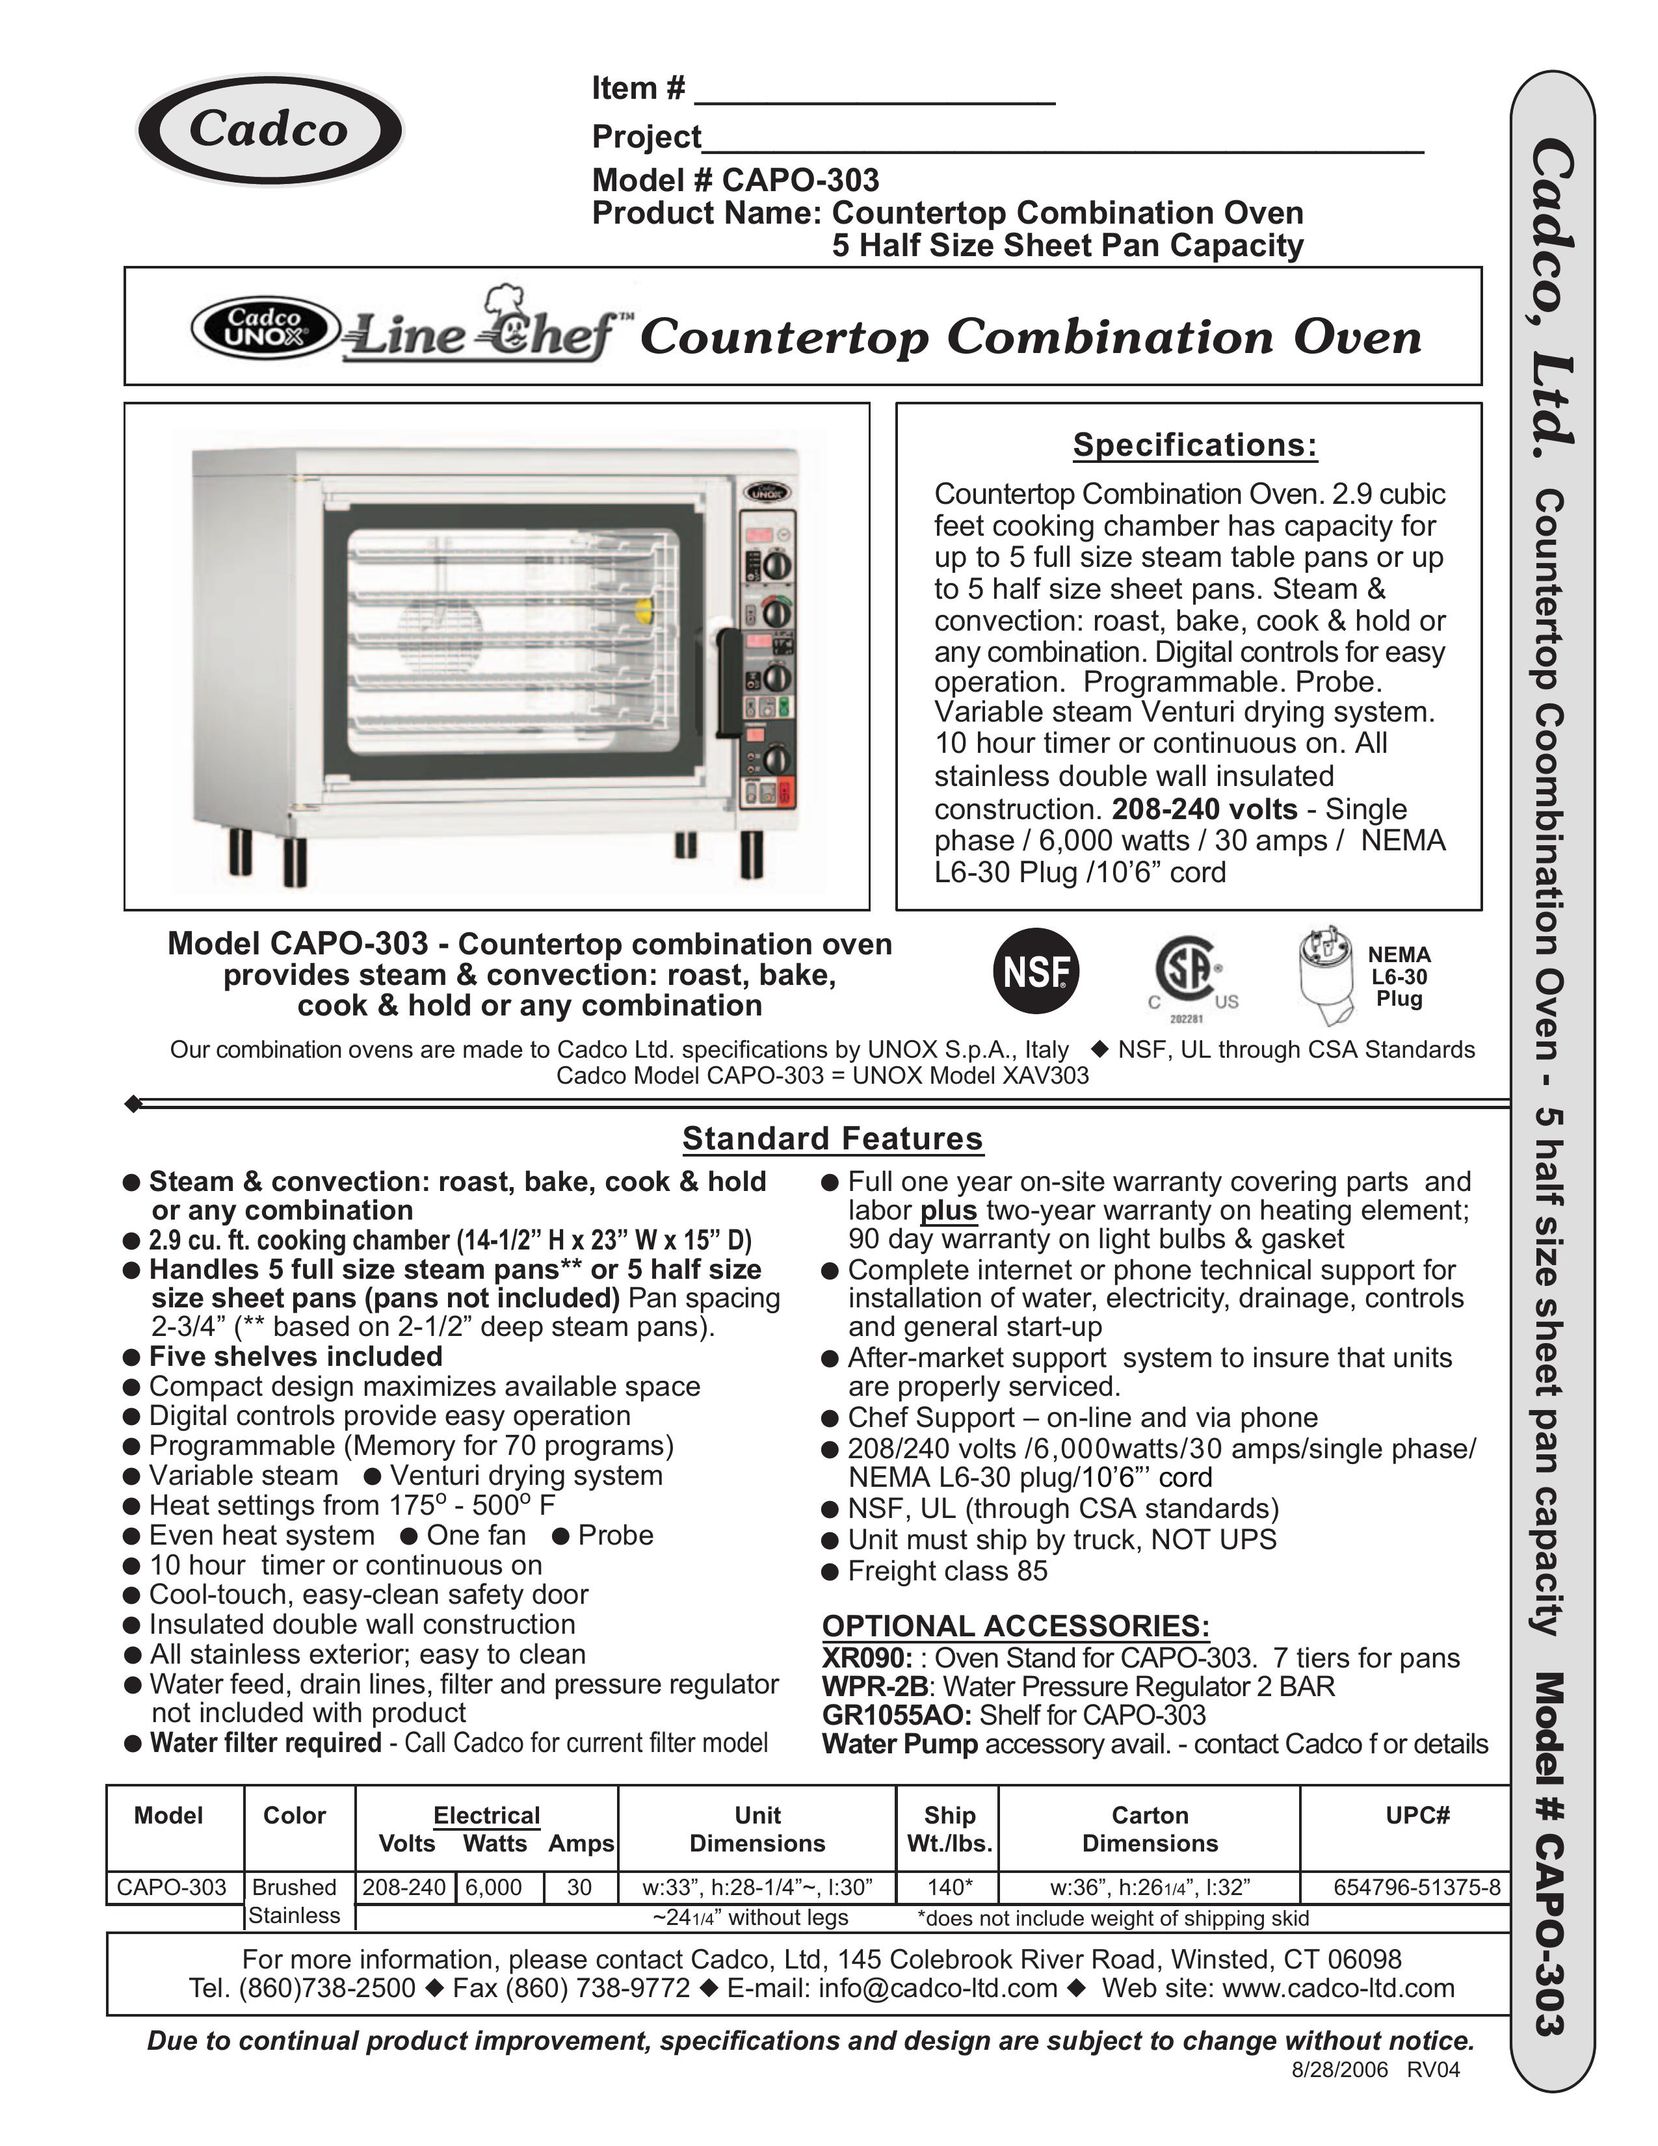 Cadco CAPO-303 Microwave Oven User Manual